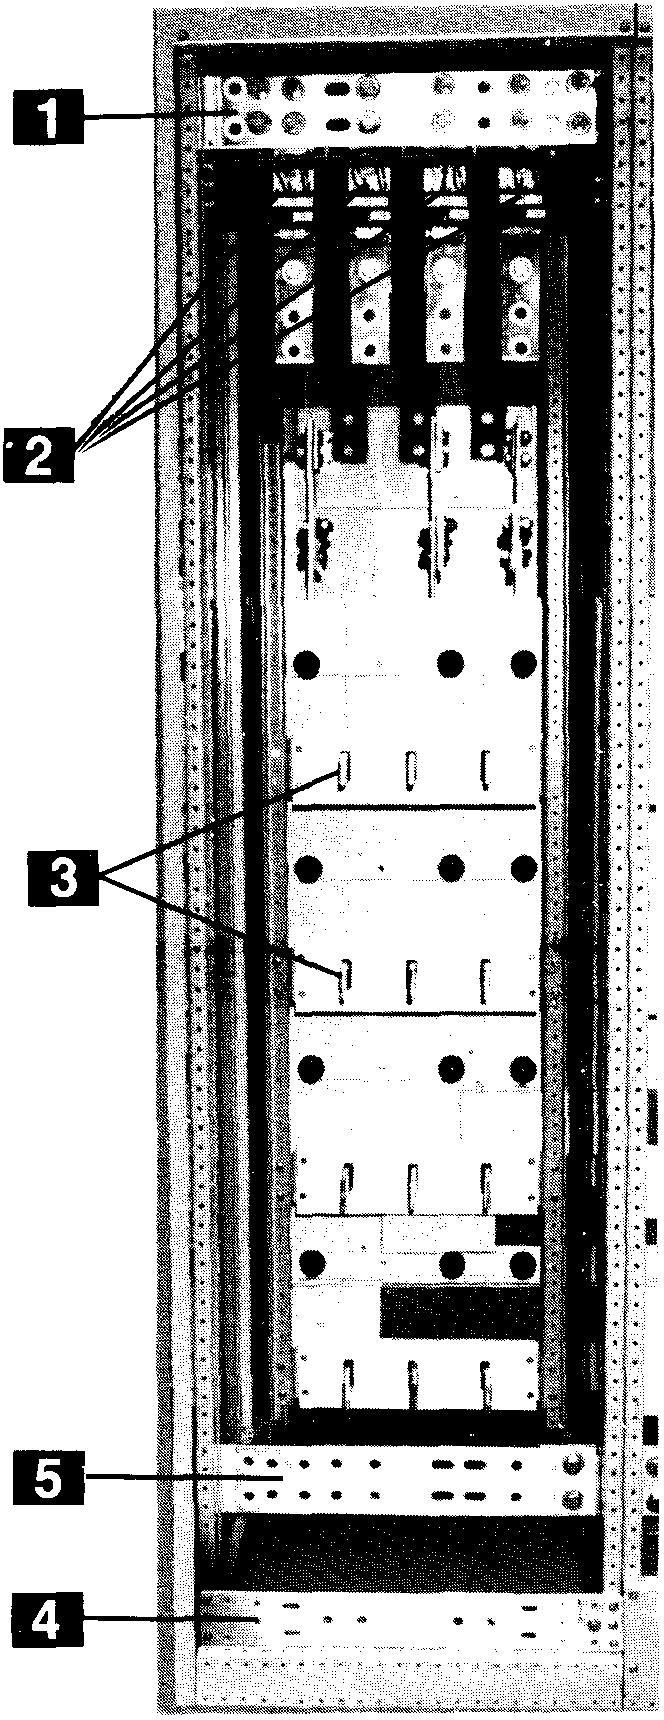 SECTON ll-description 3.12-Ground Bus All General Electric AKD-8 switchgear sections are grounded to the internal equipment ground bus (4), Fig. 3-30, located at the bottom of the cable compartment.